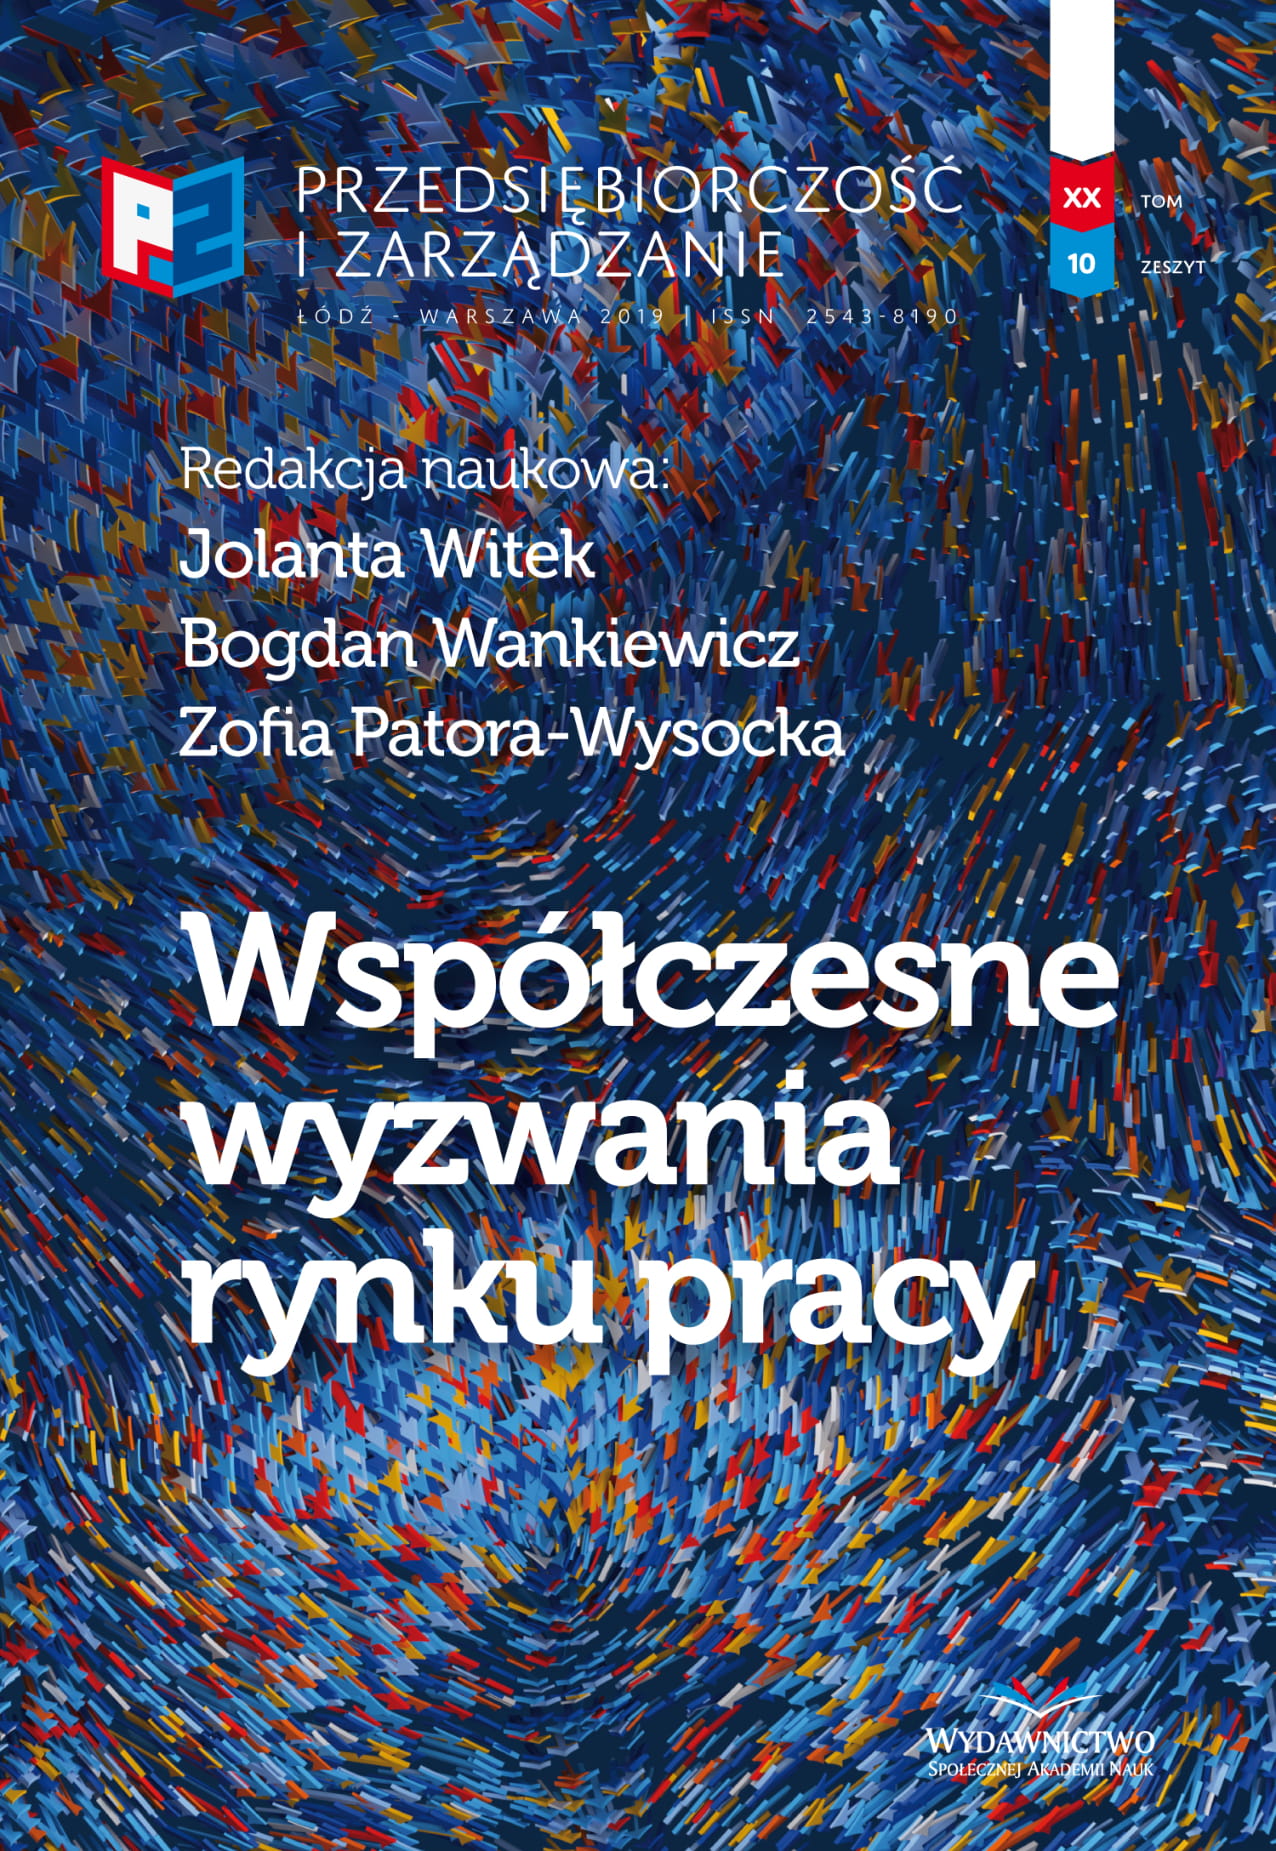 The efficiency of Labour Market Active Programs
in the Warmińsko-Mazurskie Voivodeship between 2005 and 2014 Cover Image